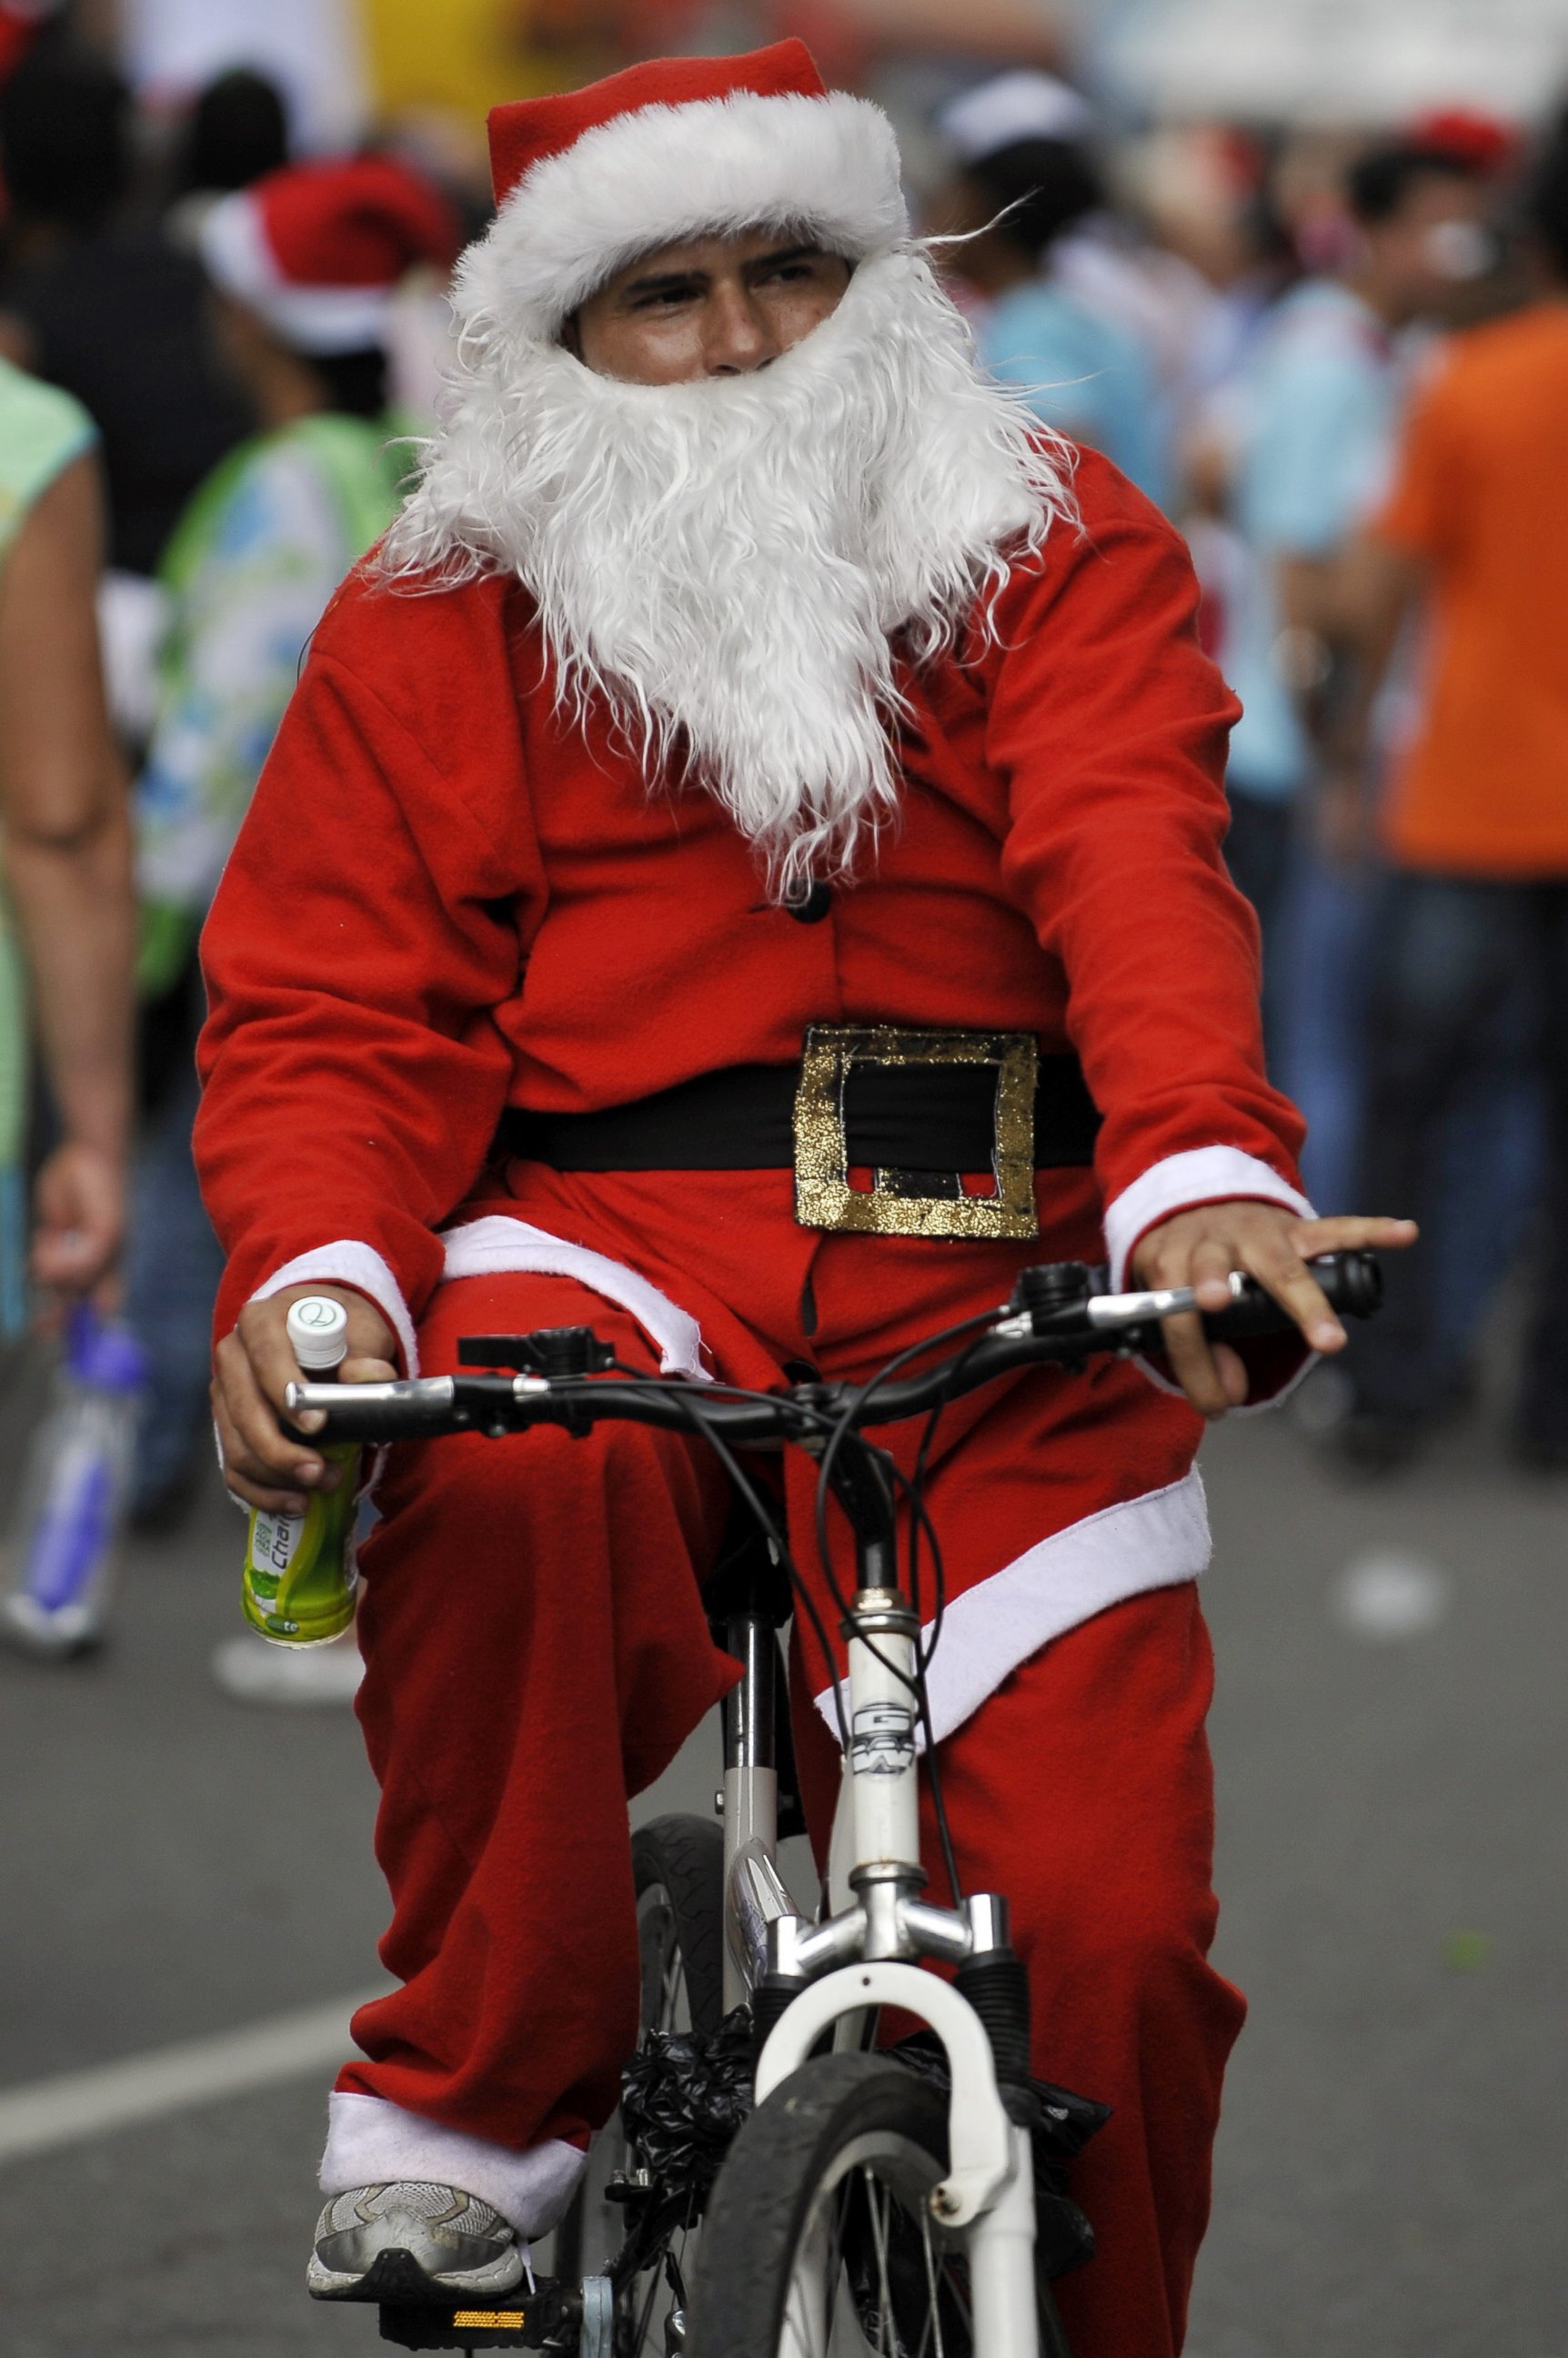 PHOTO: A man dressed as Santa Claus rides his bicycle with other hundreds along the streets of Cali, Colombia, on December 12, 2010 in a failed attempt to break the previous Guinness record of 12,000 people riding bikes dressed as Santa Claus. 